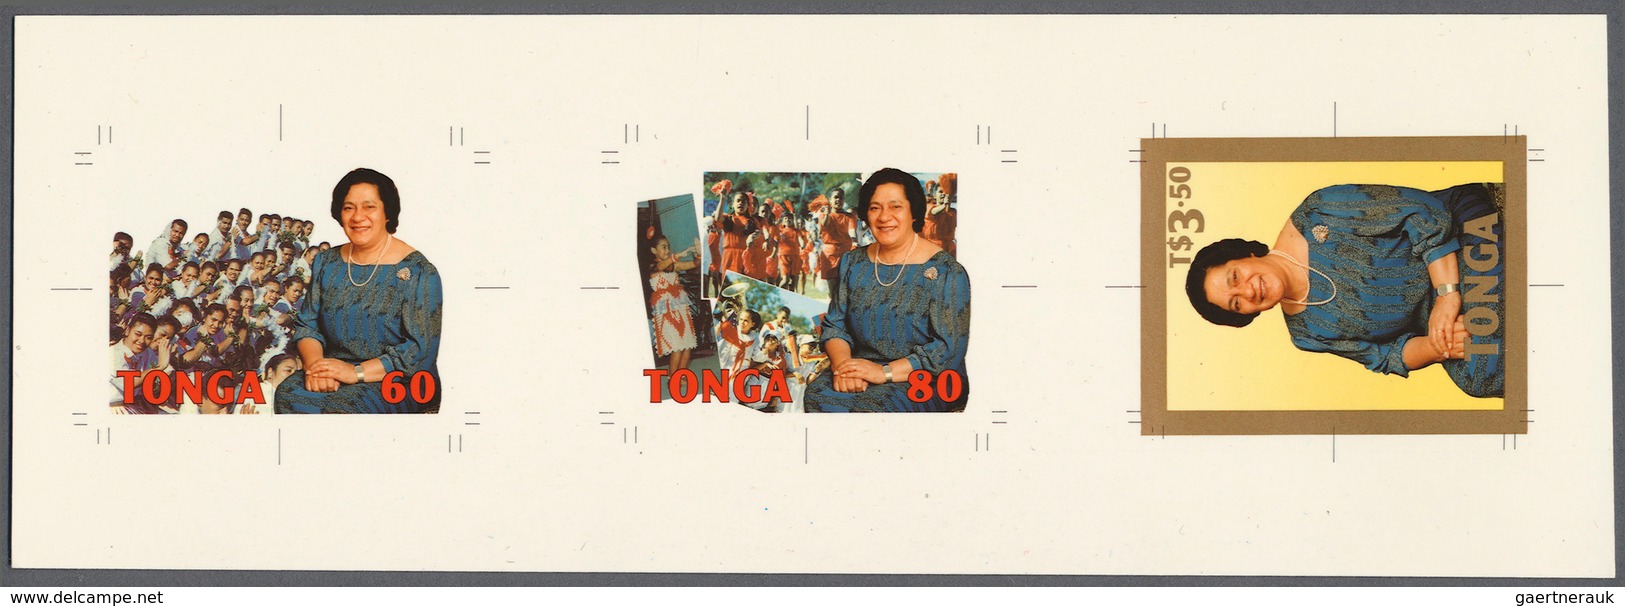 Tonga: 1943/2000, u/m collection of approx. 1.700 specialities like specimen overprints, imperfs, st